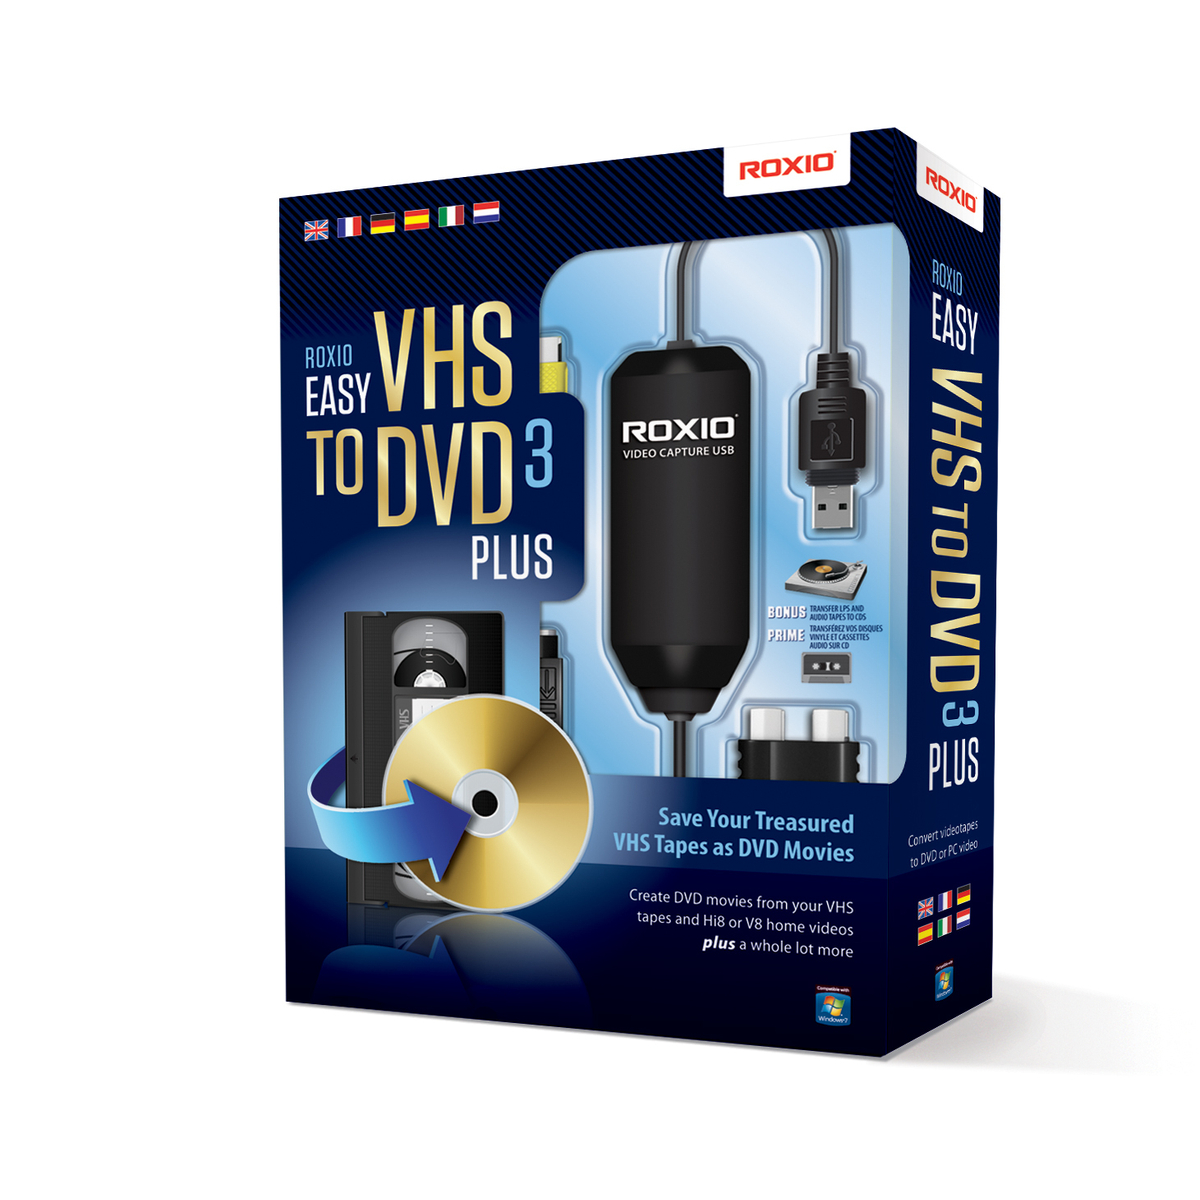 EASY VHS TO DVD 3 PLUS